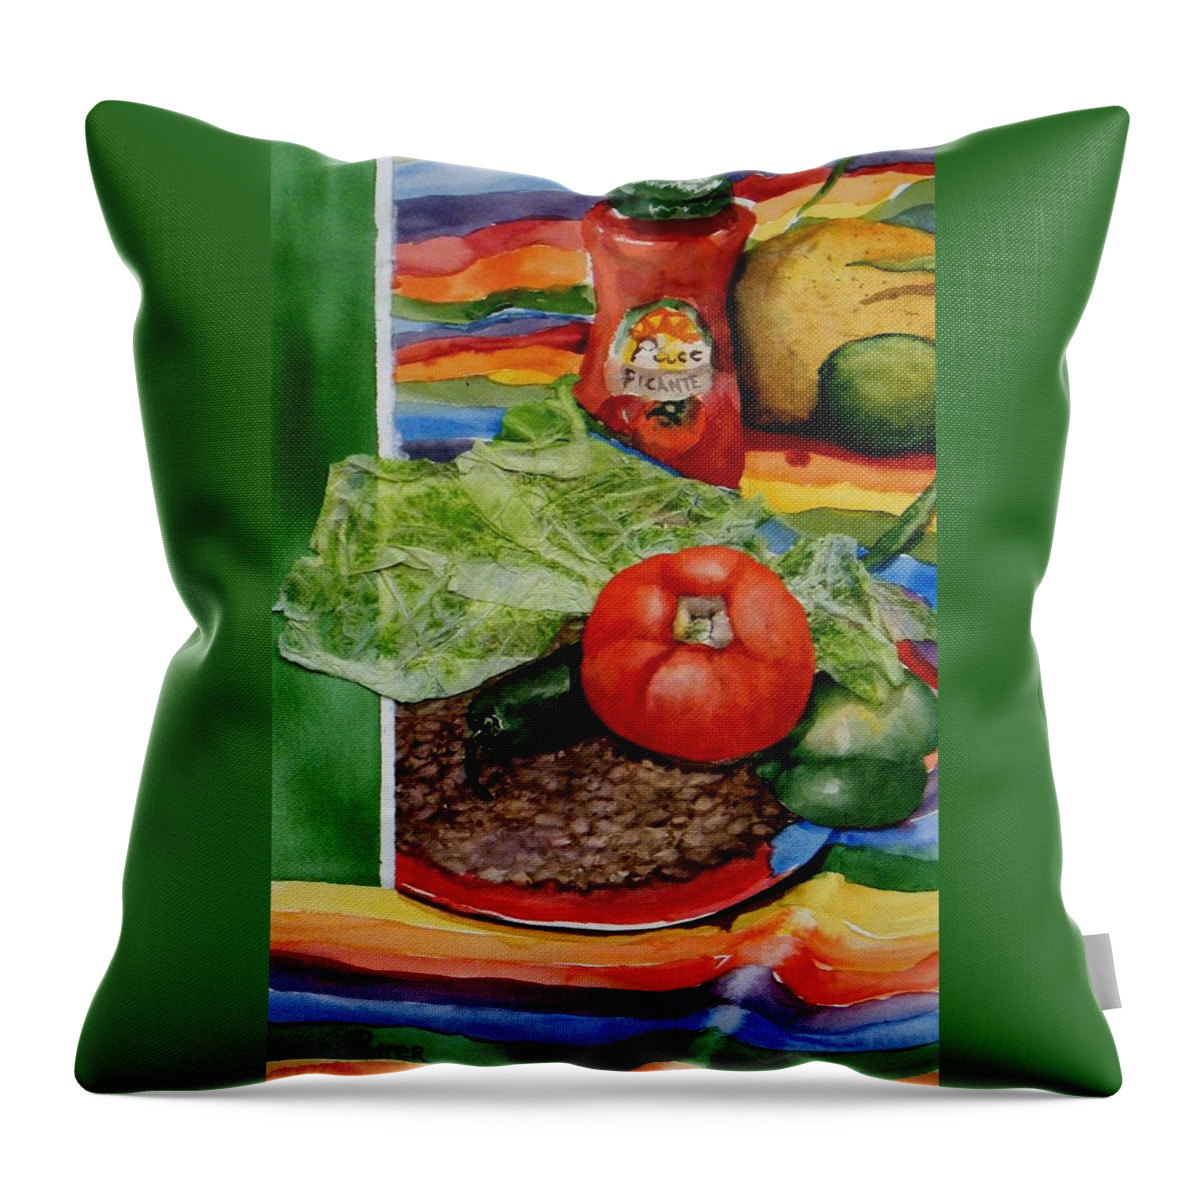 Bright Throw Pillow featuring the painting Fiesta by Virginia Potter